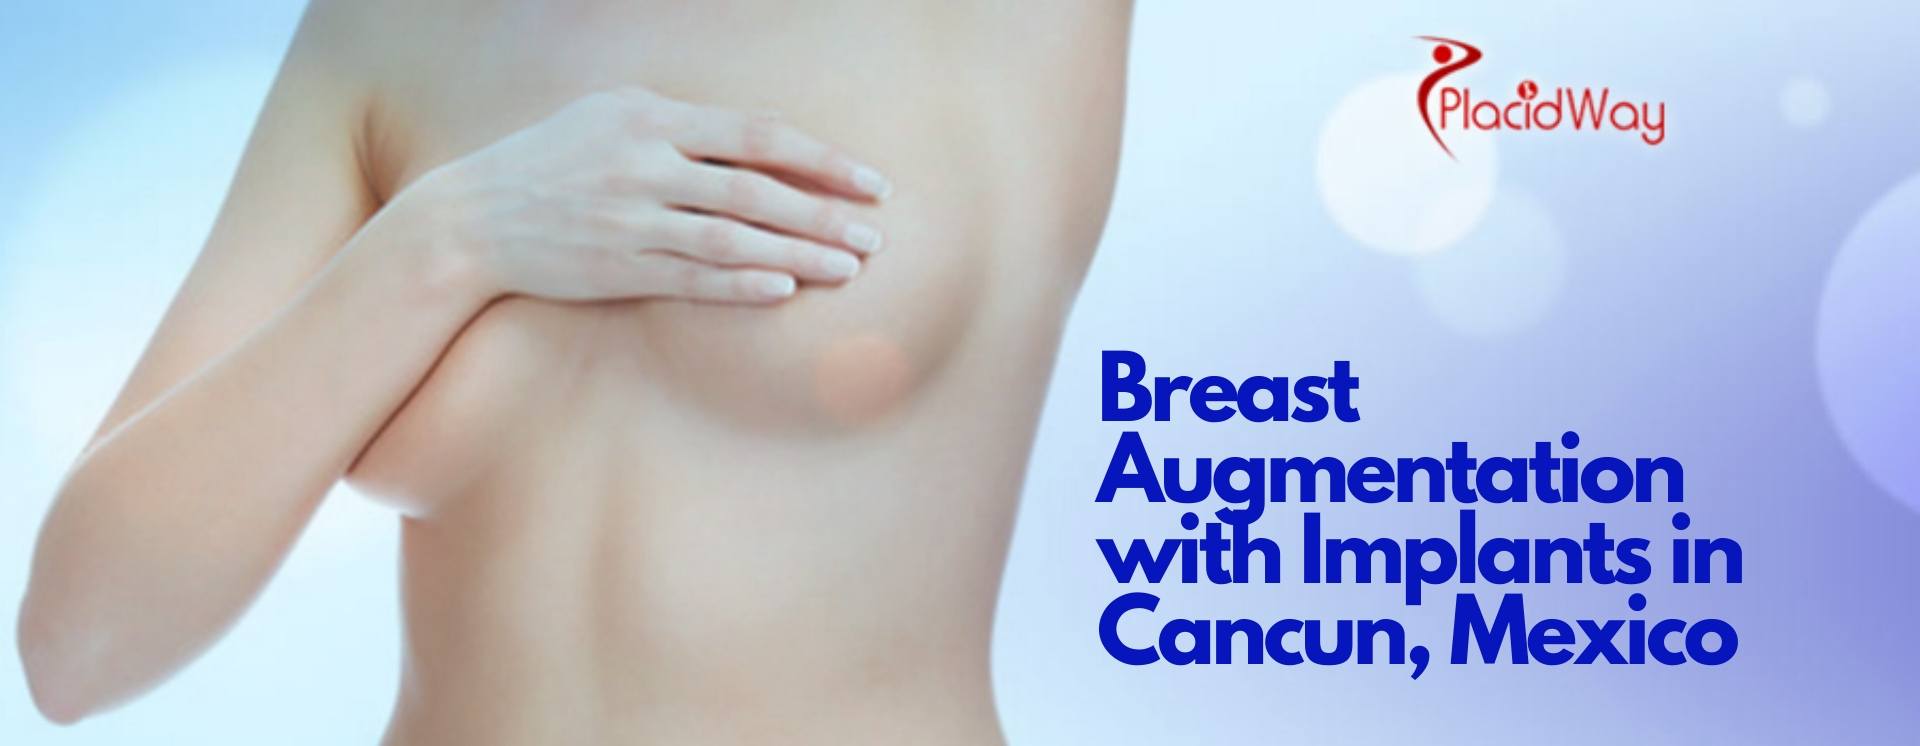 Breast Augmentation with Implants in Cancun, Mexico